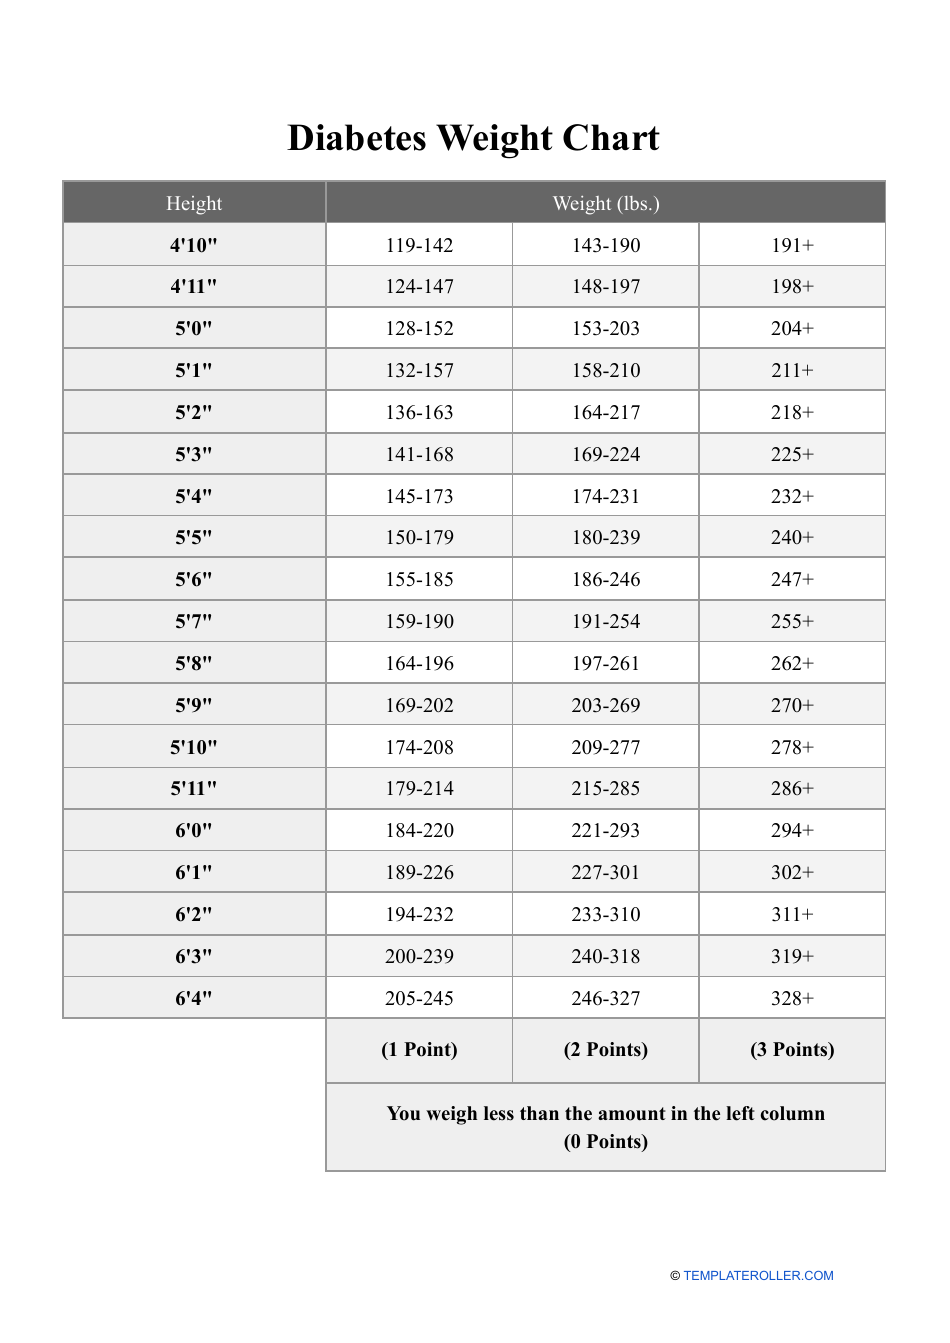 Diabetes Weight Chart - A comprehensive guide to find the ideal weight range for individuals with diabetes.